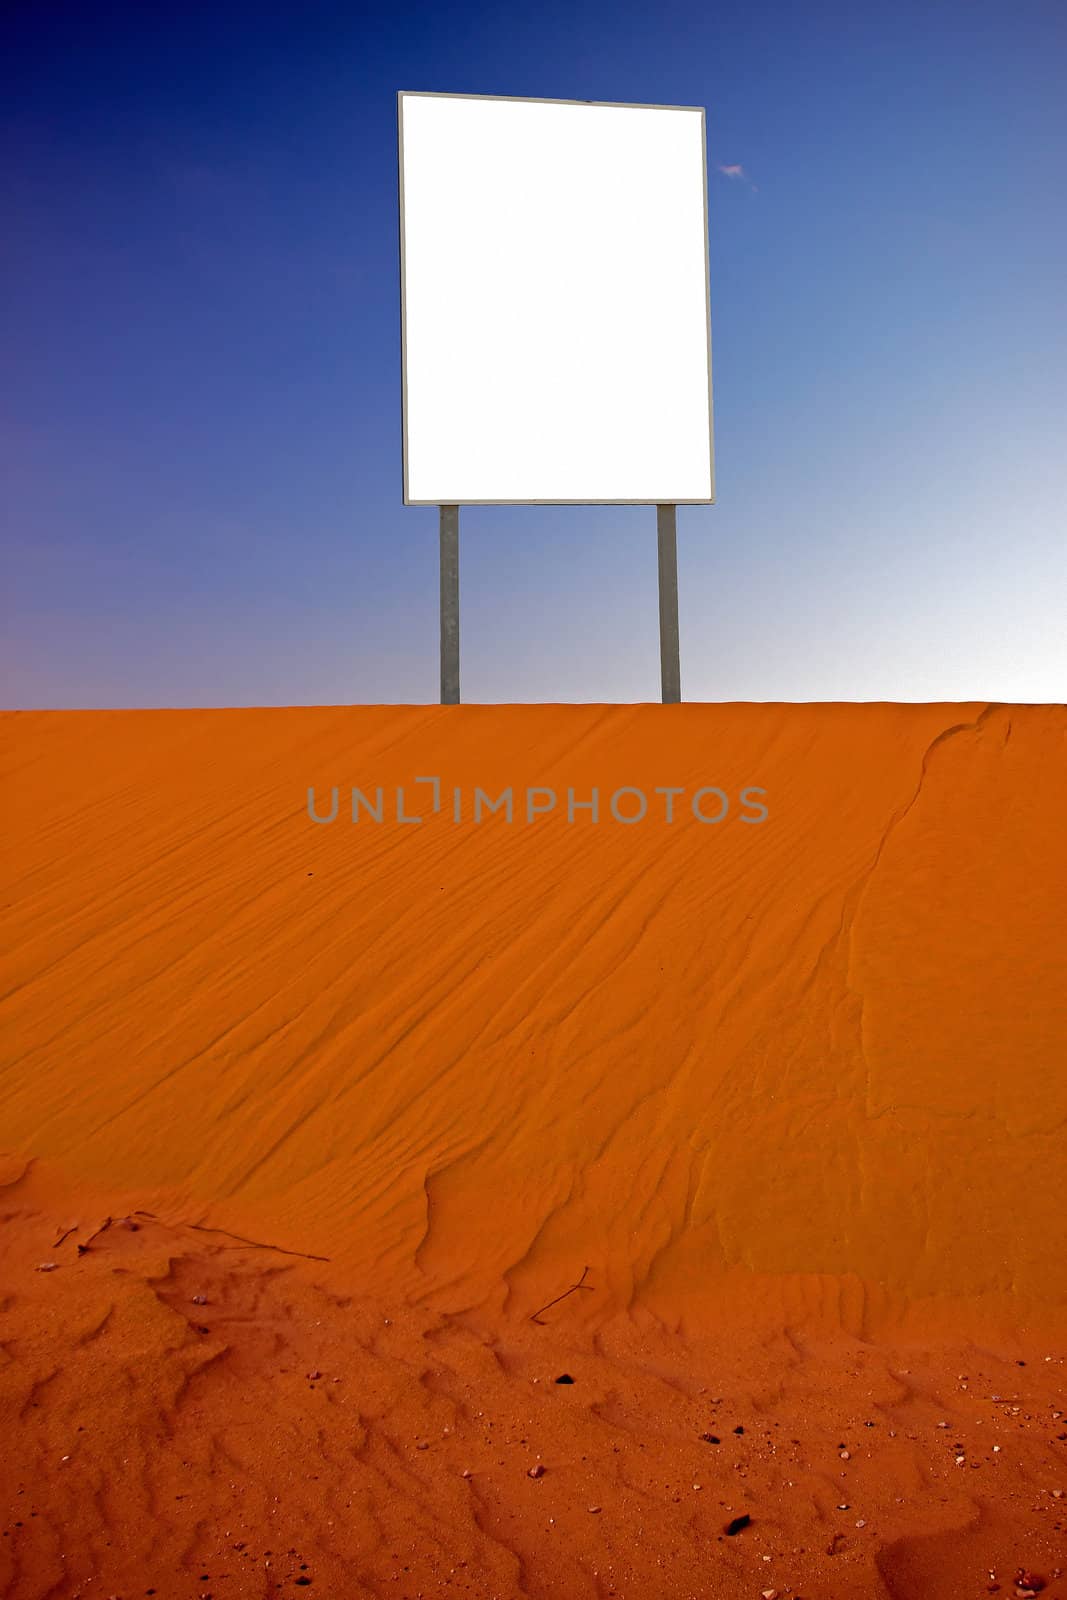 billboard in the desert by mcarbo82